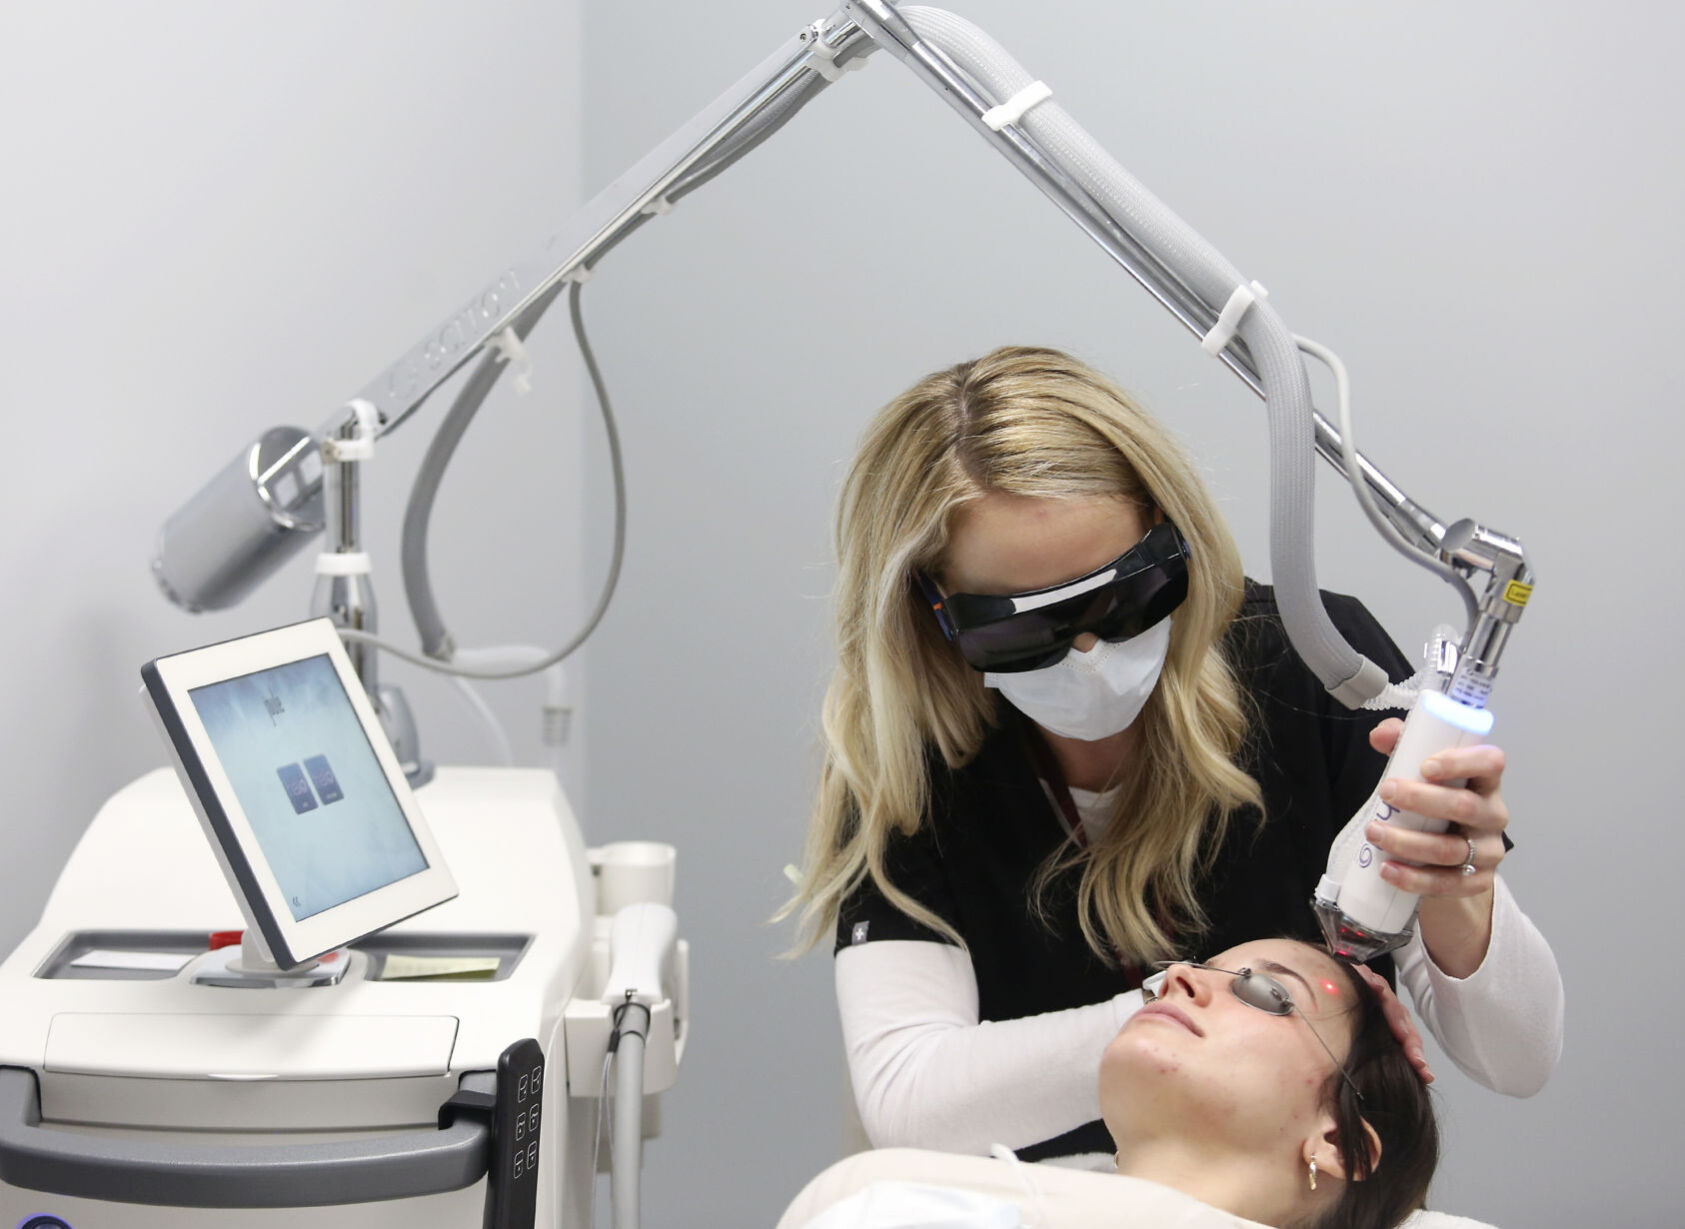 Emily May (top) demonstrates the use of a Halo laser for skin resurfacing on Jordan Christensen at The Aesthetic Center by Medical Associates in Dubuque on Friday, Jan. 29, 2021. PHOTO CREDIT: NICKI KOHL